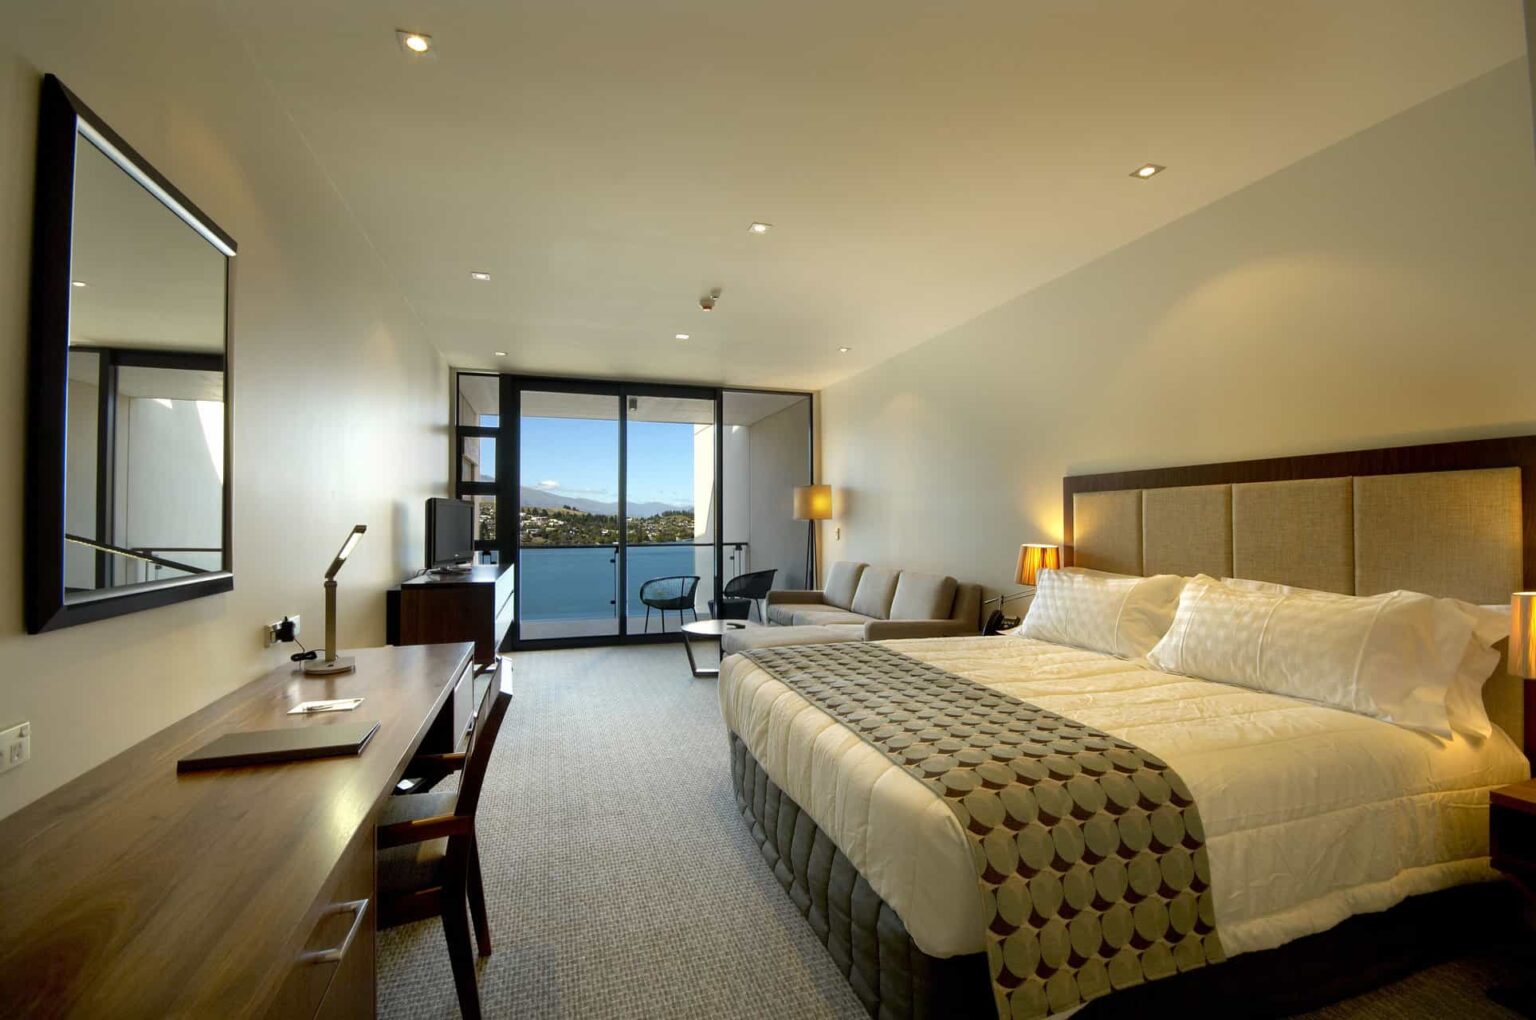 Executive Lake View Hotel Room with large king bed and balcony